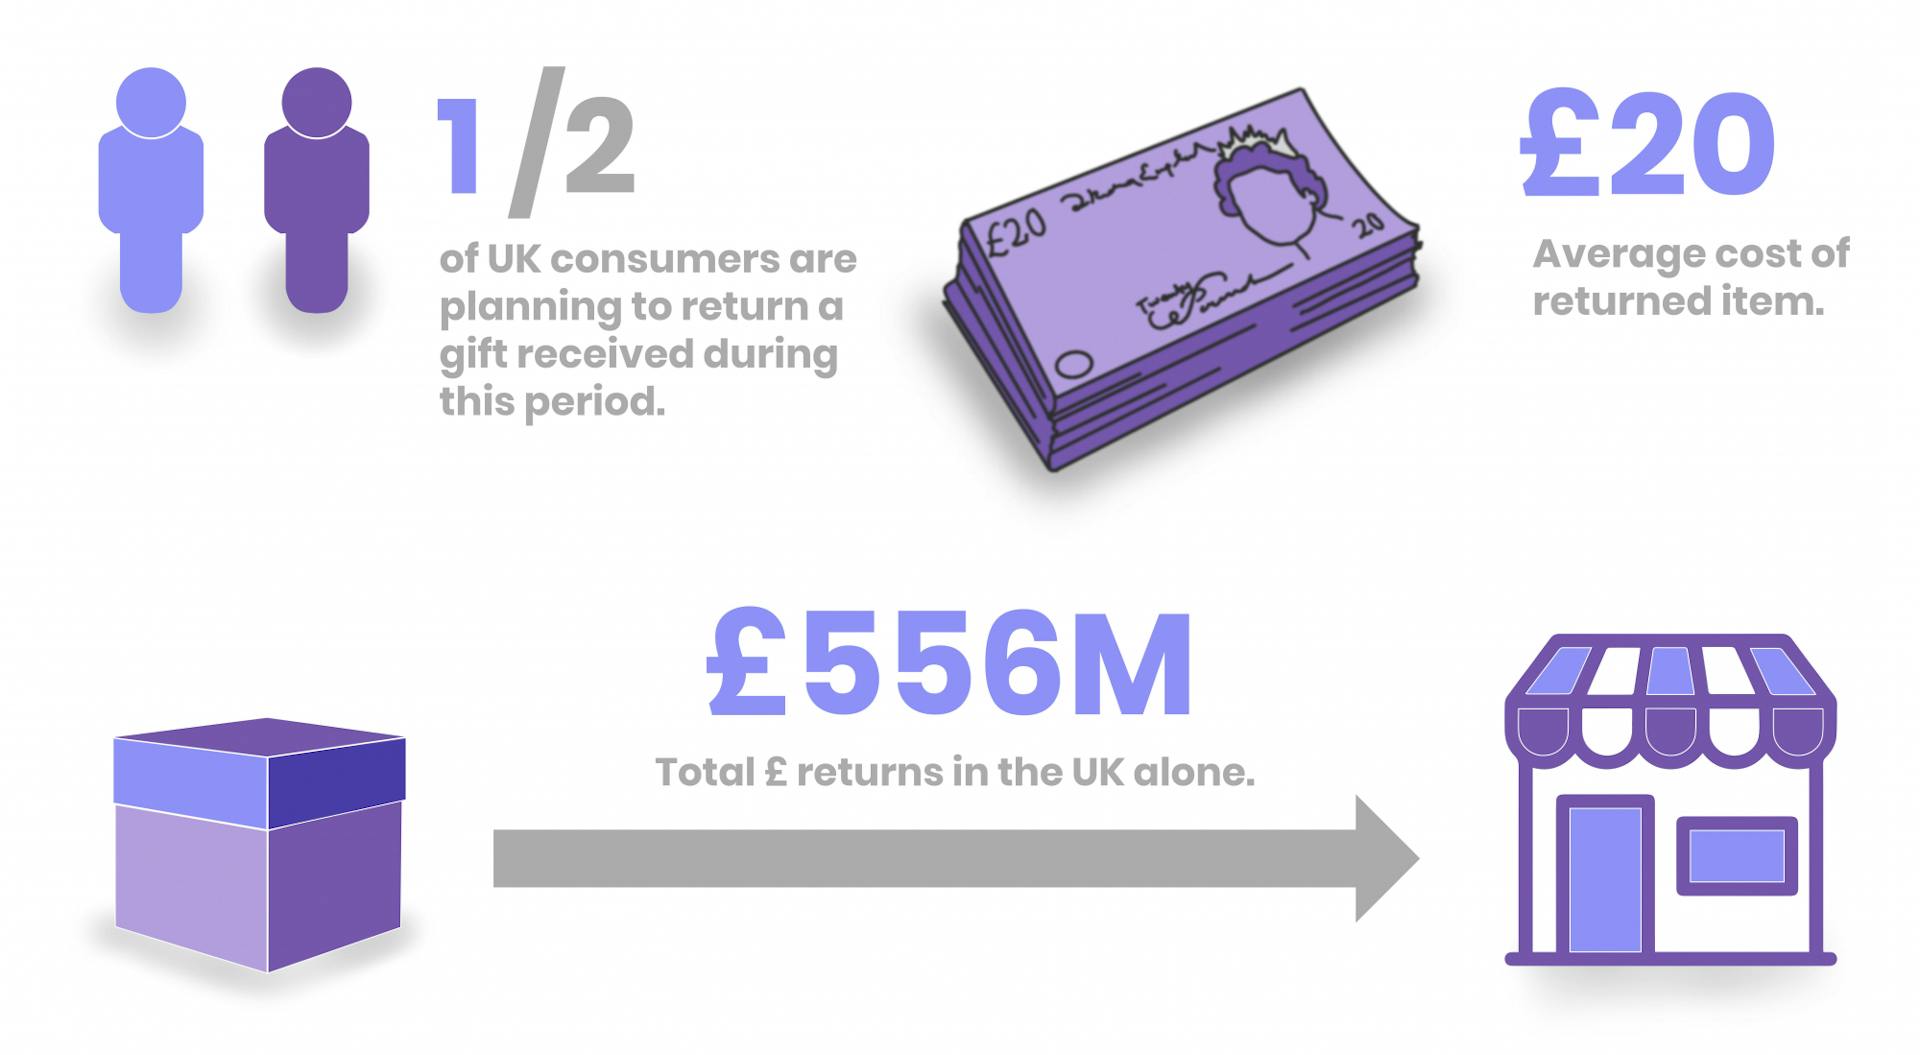 An image highlighting online gifting stats mentioned in the text.